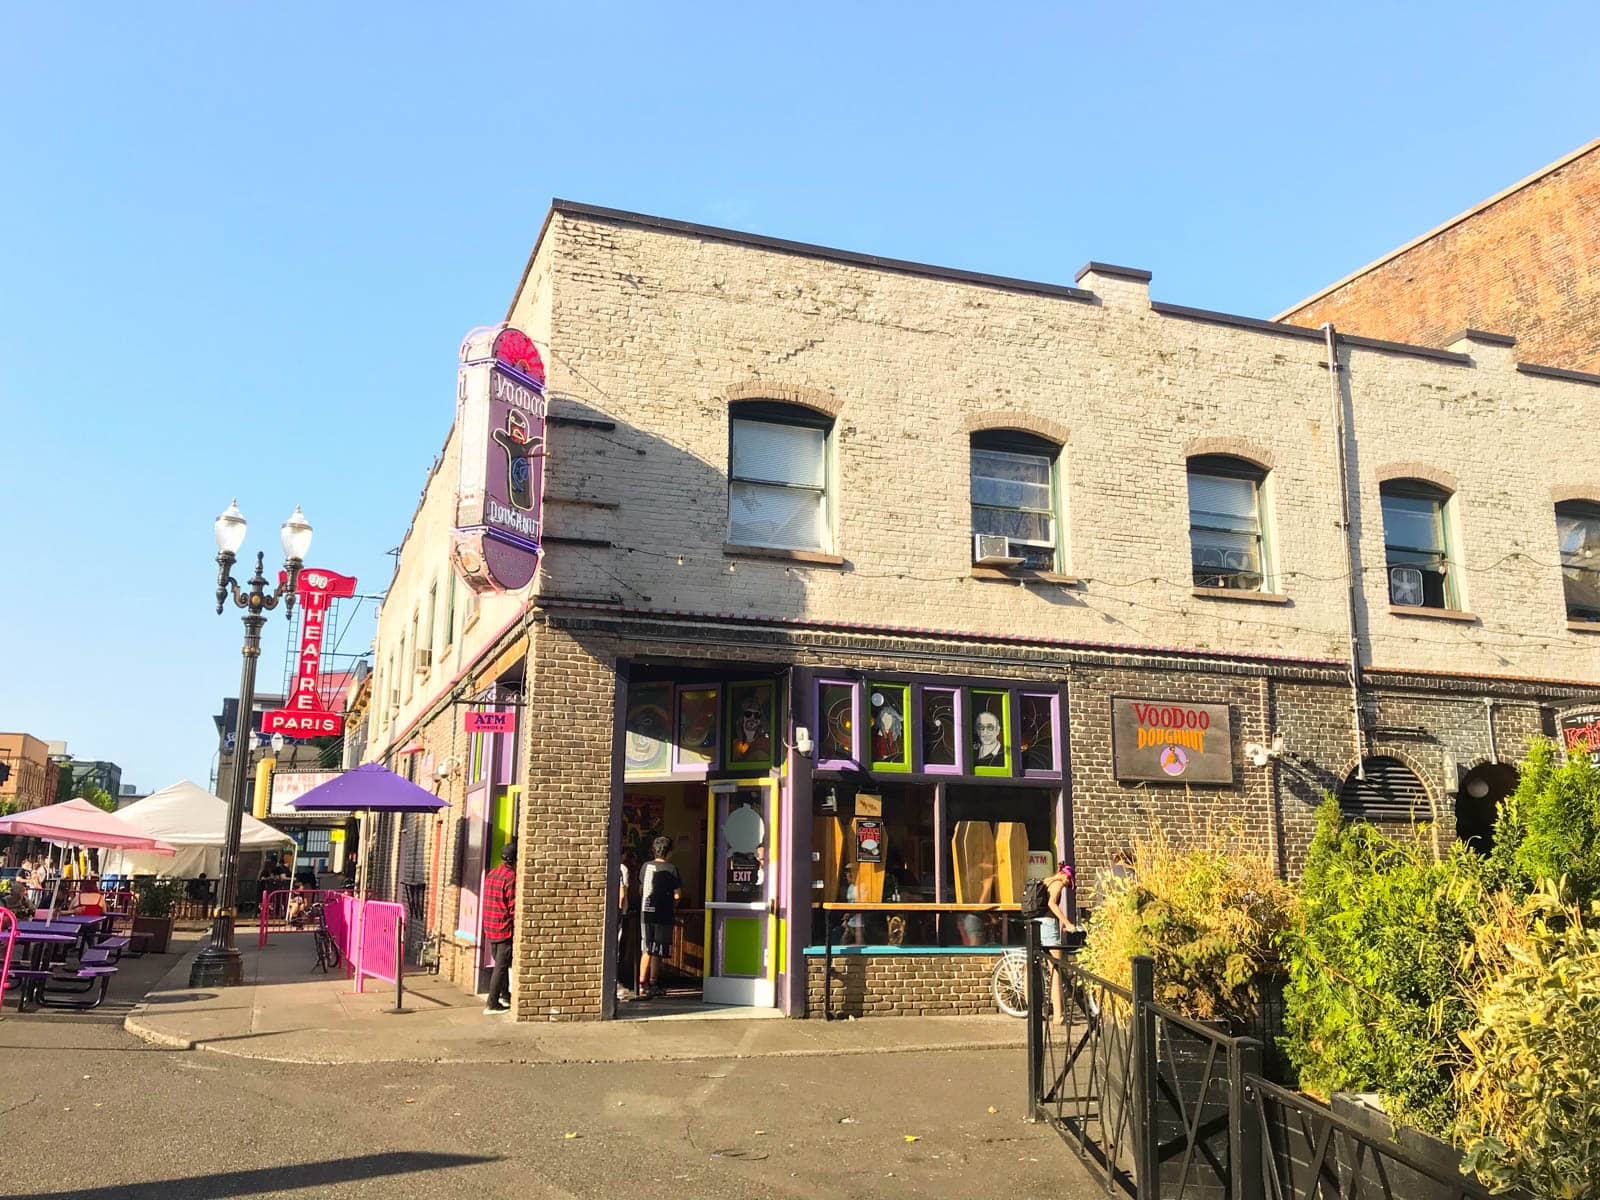 The front of a doughnut shop, decorated with brightly coloured signage in purple, pink, and lime green. A sign reads “Voodoo Doughnut”. It’s a sunny day and the sky is very blue